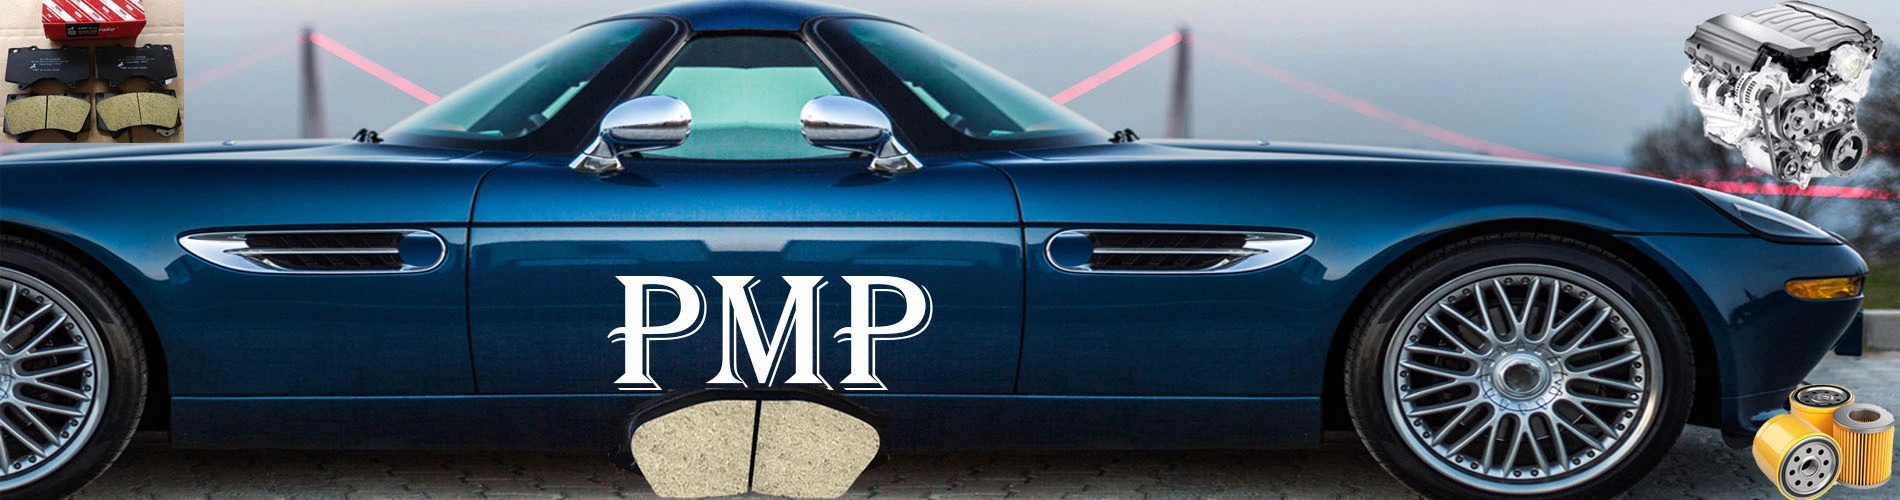 A vehicle displaying the letters PMP, parked near a collection of brake pads for cars.